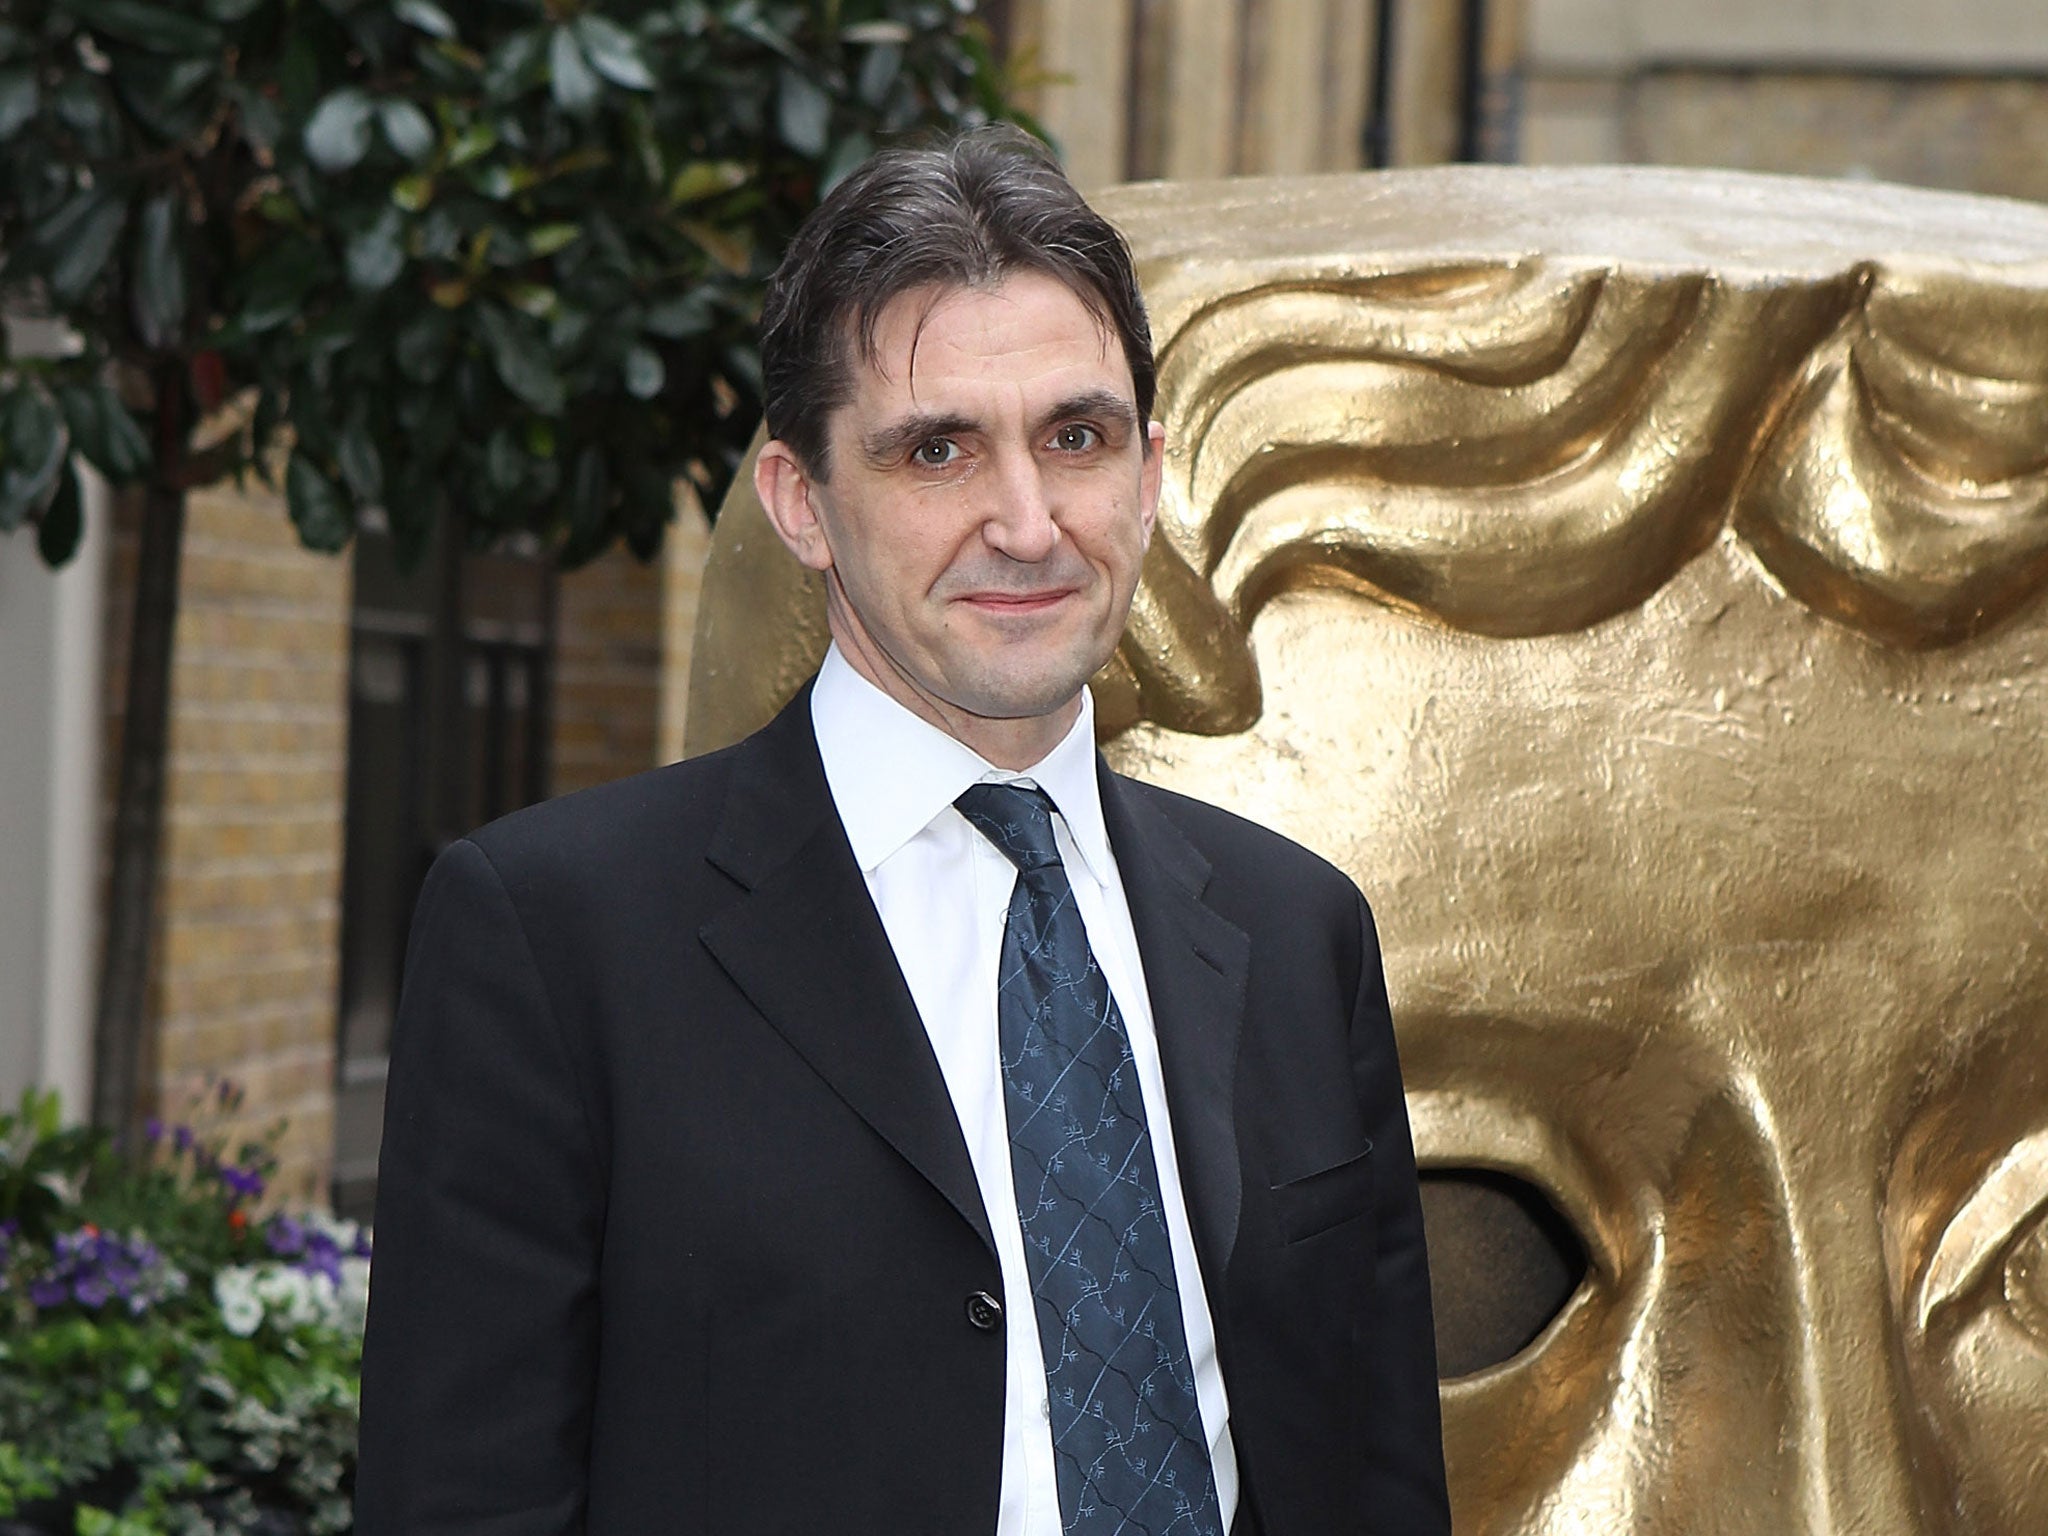 Stephen McGann, who plays Dr Turner in 'Don't Call the Midwife', has said the acting profession is excluding working class children